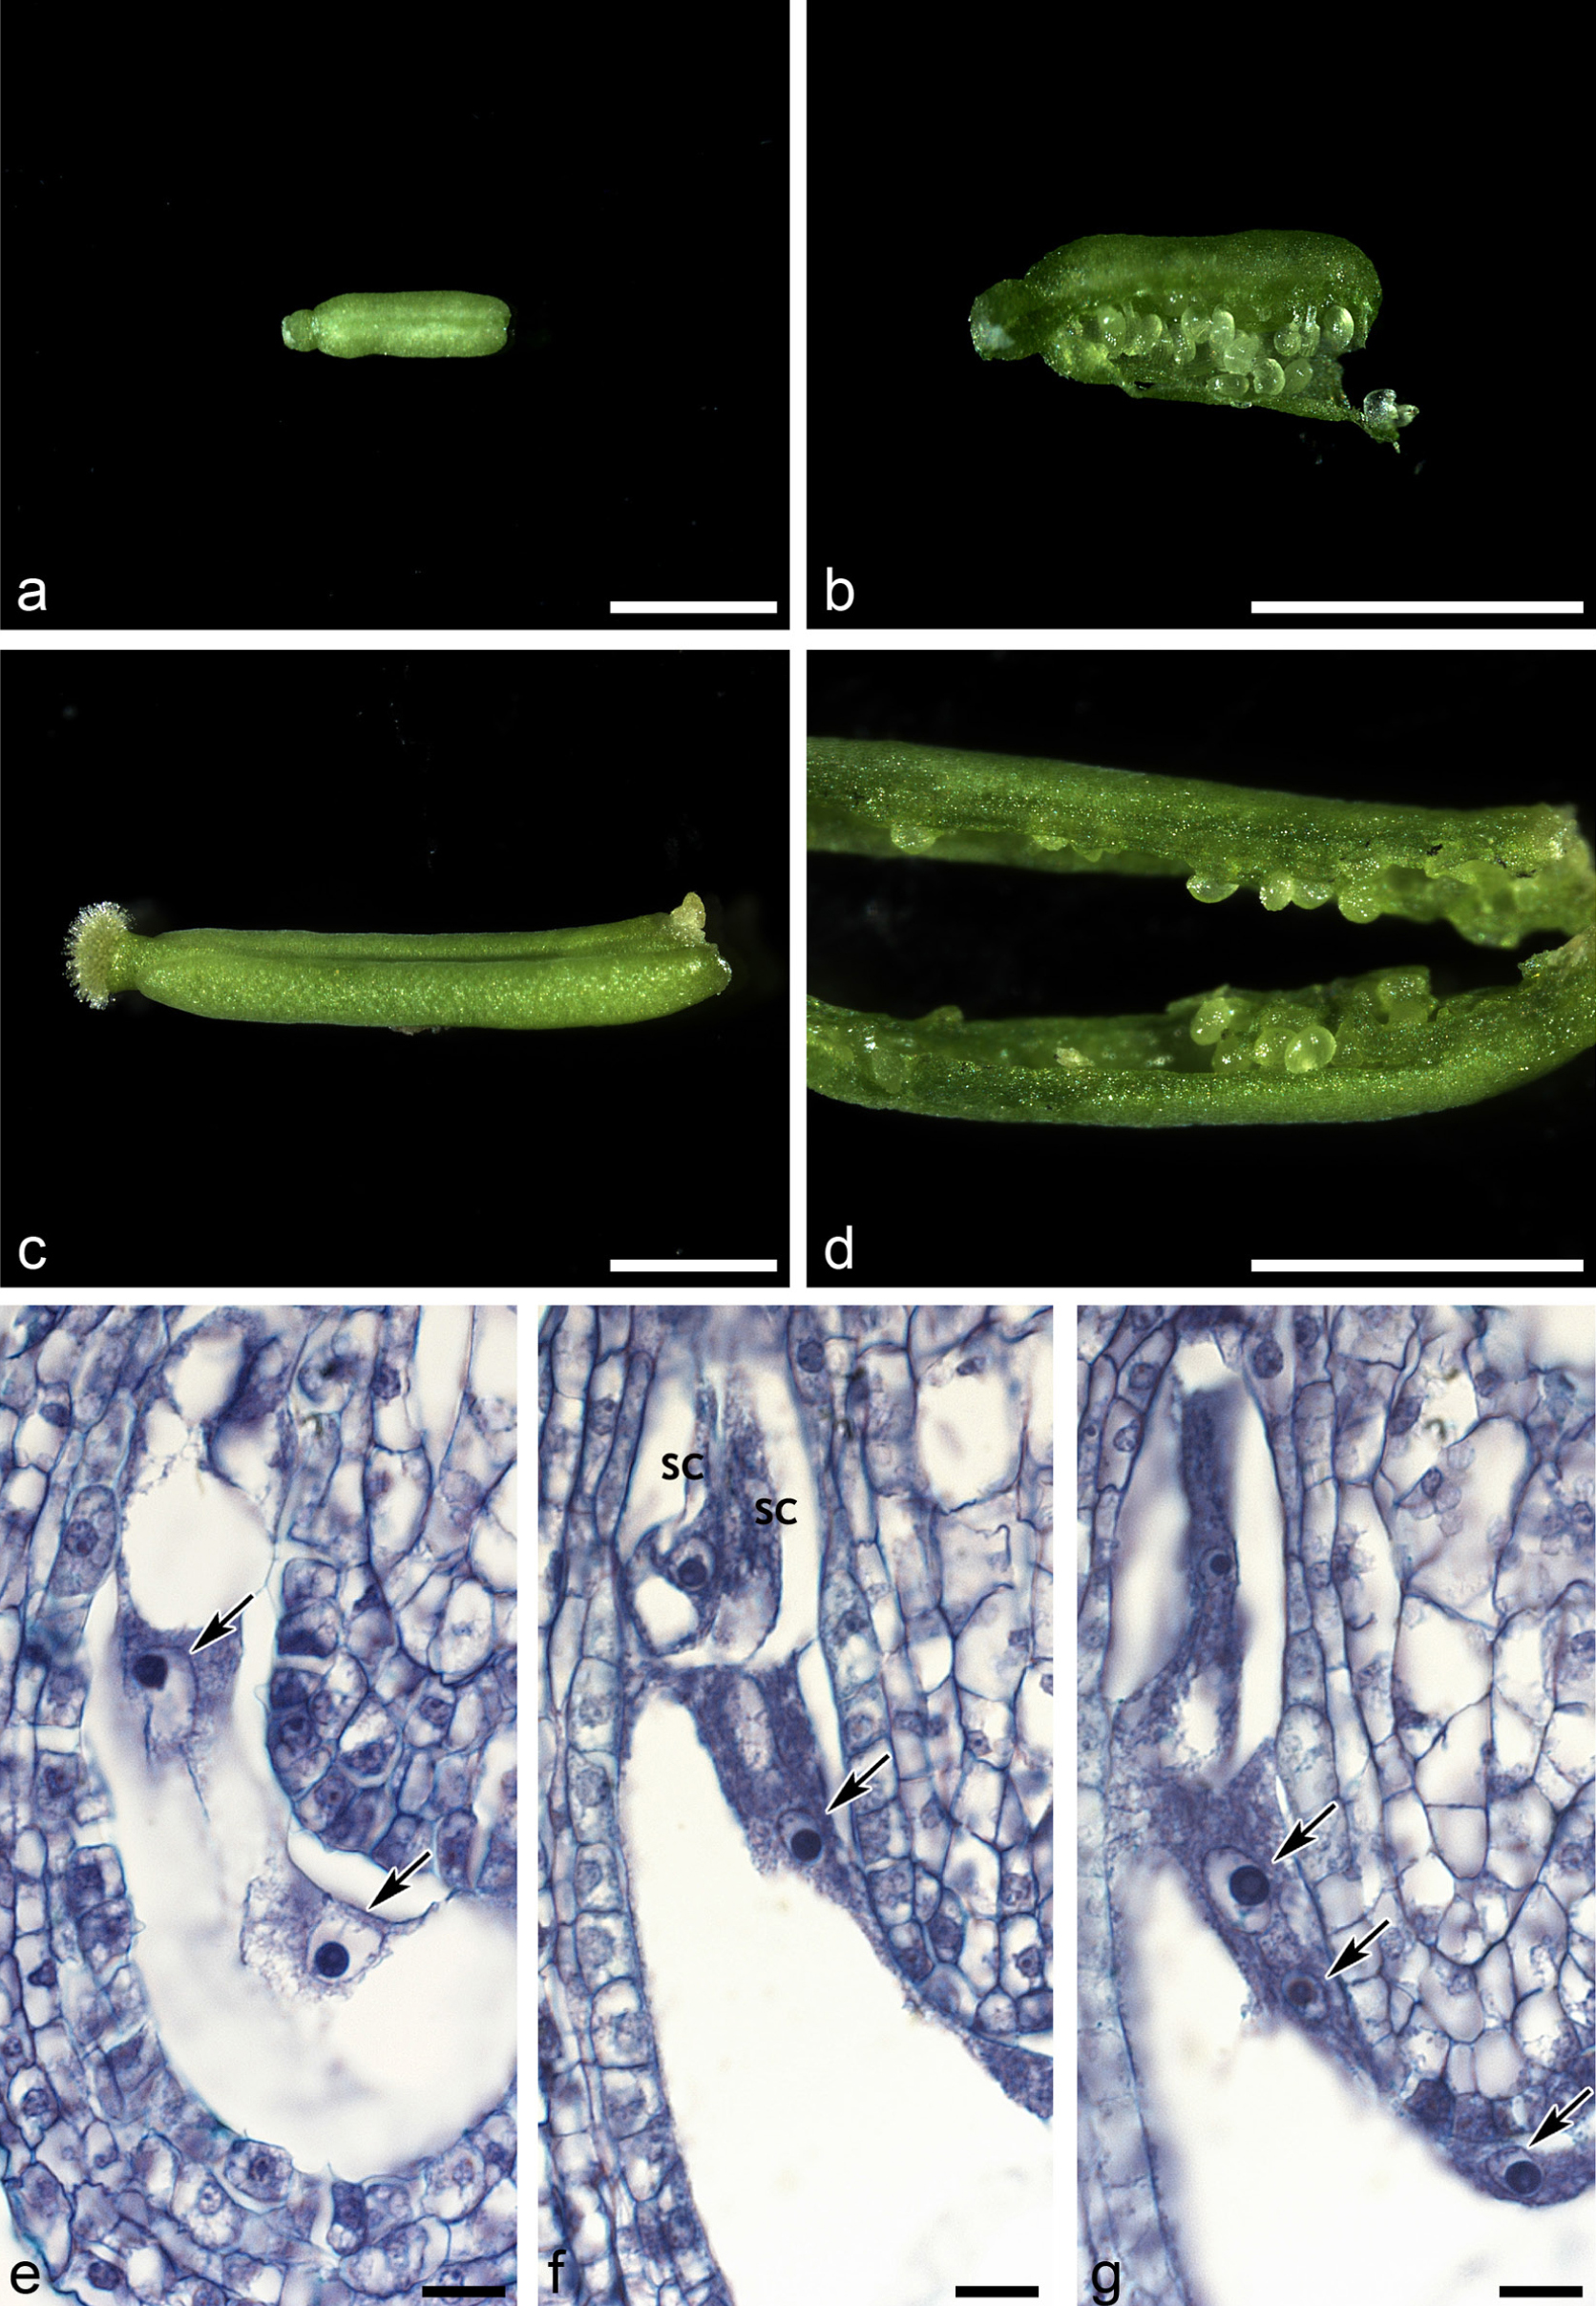 ◀ Fig. 1. Unpollinated Arabidopsis Col-0 pistils at inoculation and cultured on MS 6% + estrone 1 µM for 7 days (a-d), and longitudinal paraffin sections of ovules inside unpollinated ovaries (e-g): a, b – pistils at inoculation; enlarged pistils (c) and ovules inside ovaries (d) after 7 days of culture; e – AE with two distant nuclei (arrows); f, g – few nucleate AE (arrows) accompanied by egg apparatus, visible synergids (sc). Bar – 1 mm (a-d) and 10 µm (e-g).